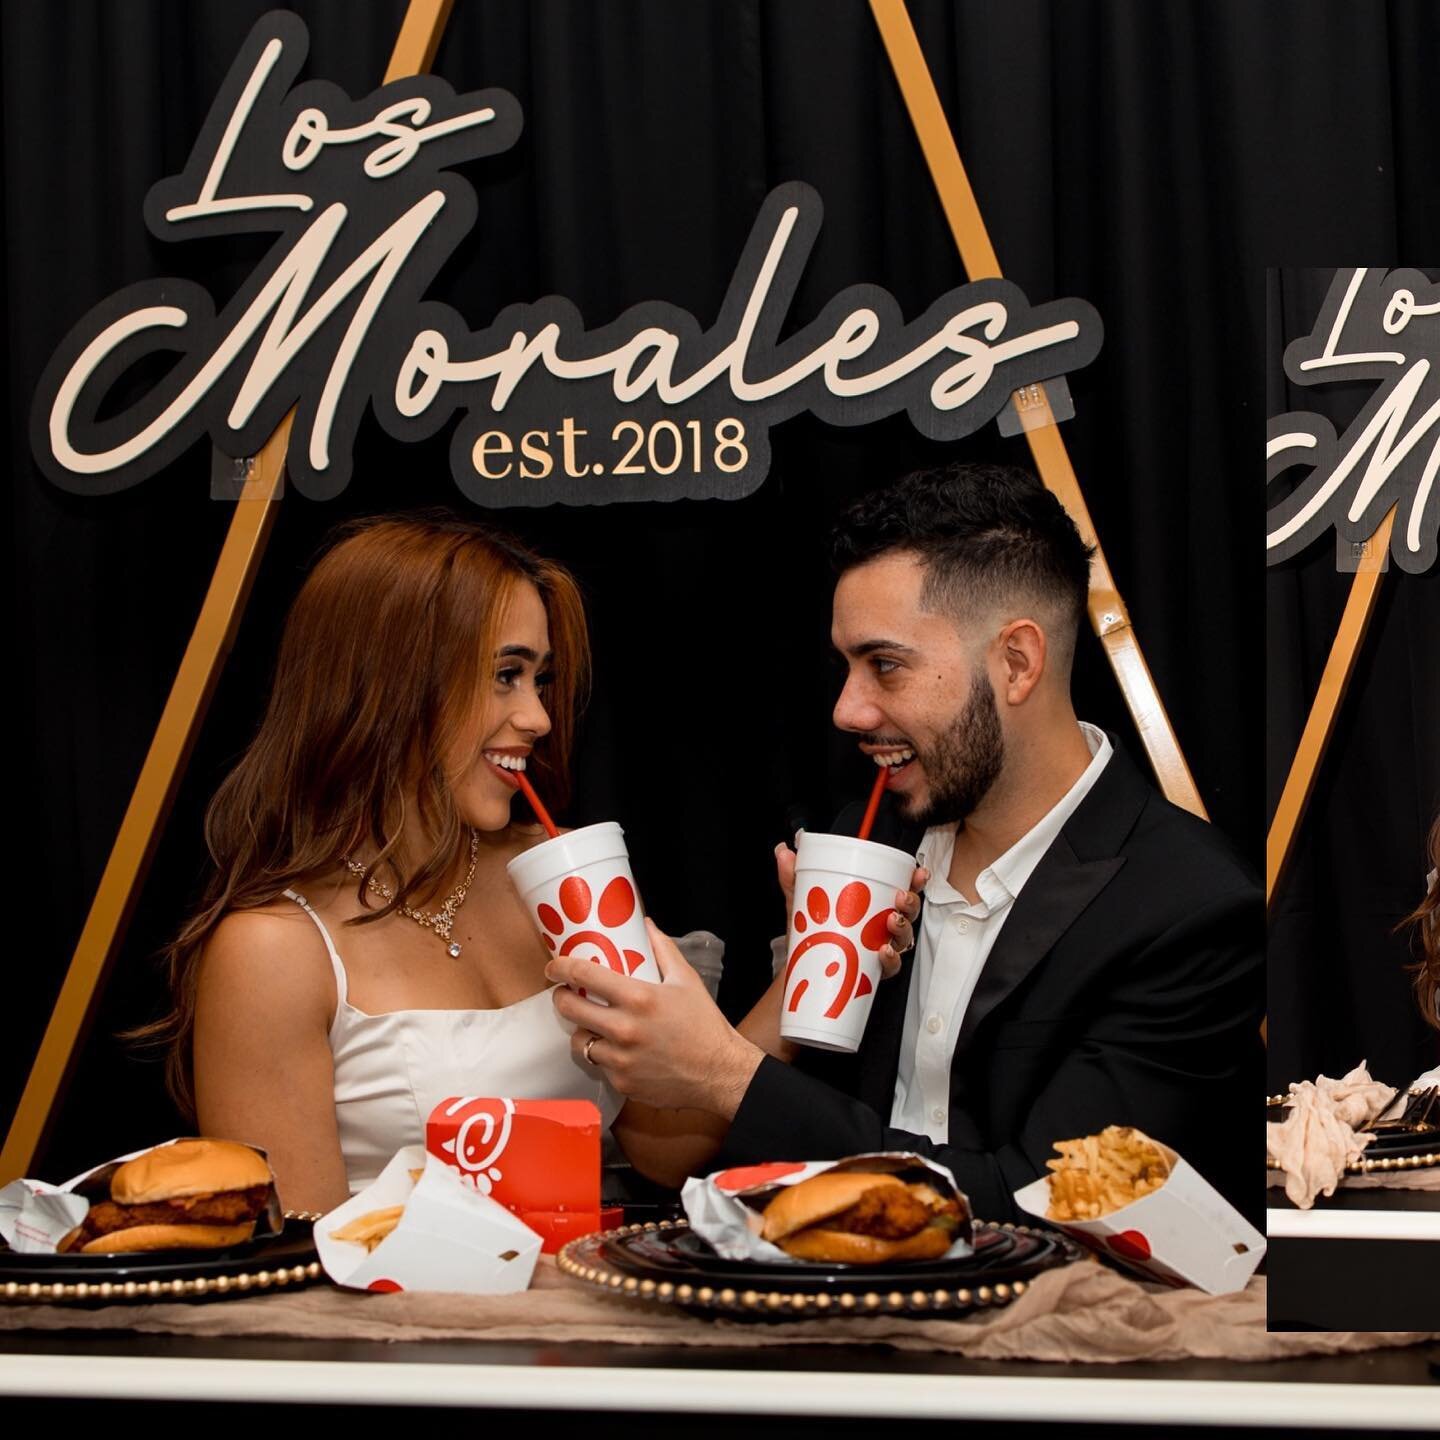 Chicken nuggets, Laughter &amp; happily ever after &hearts;️✨🐔 |
Los Morales